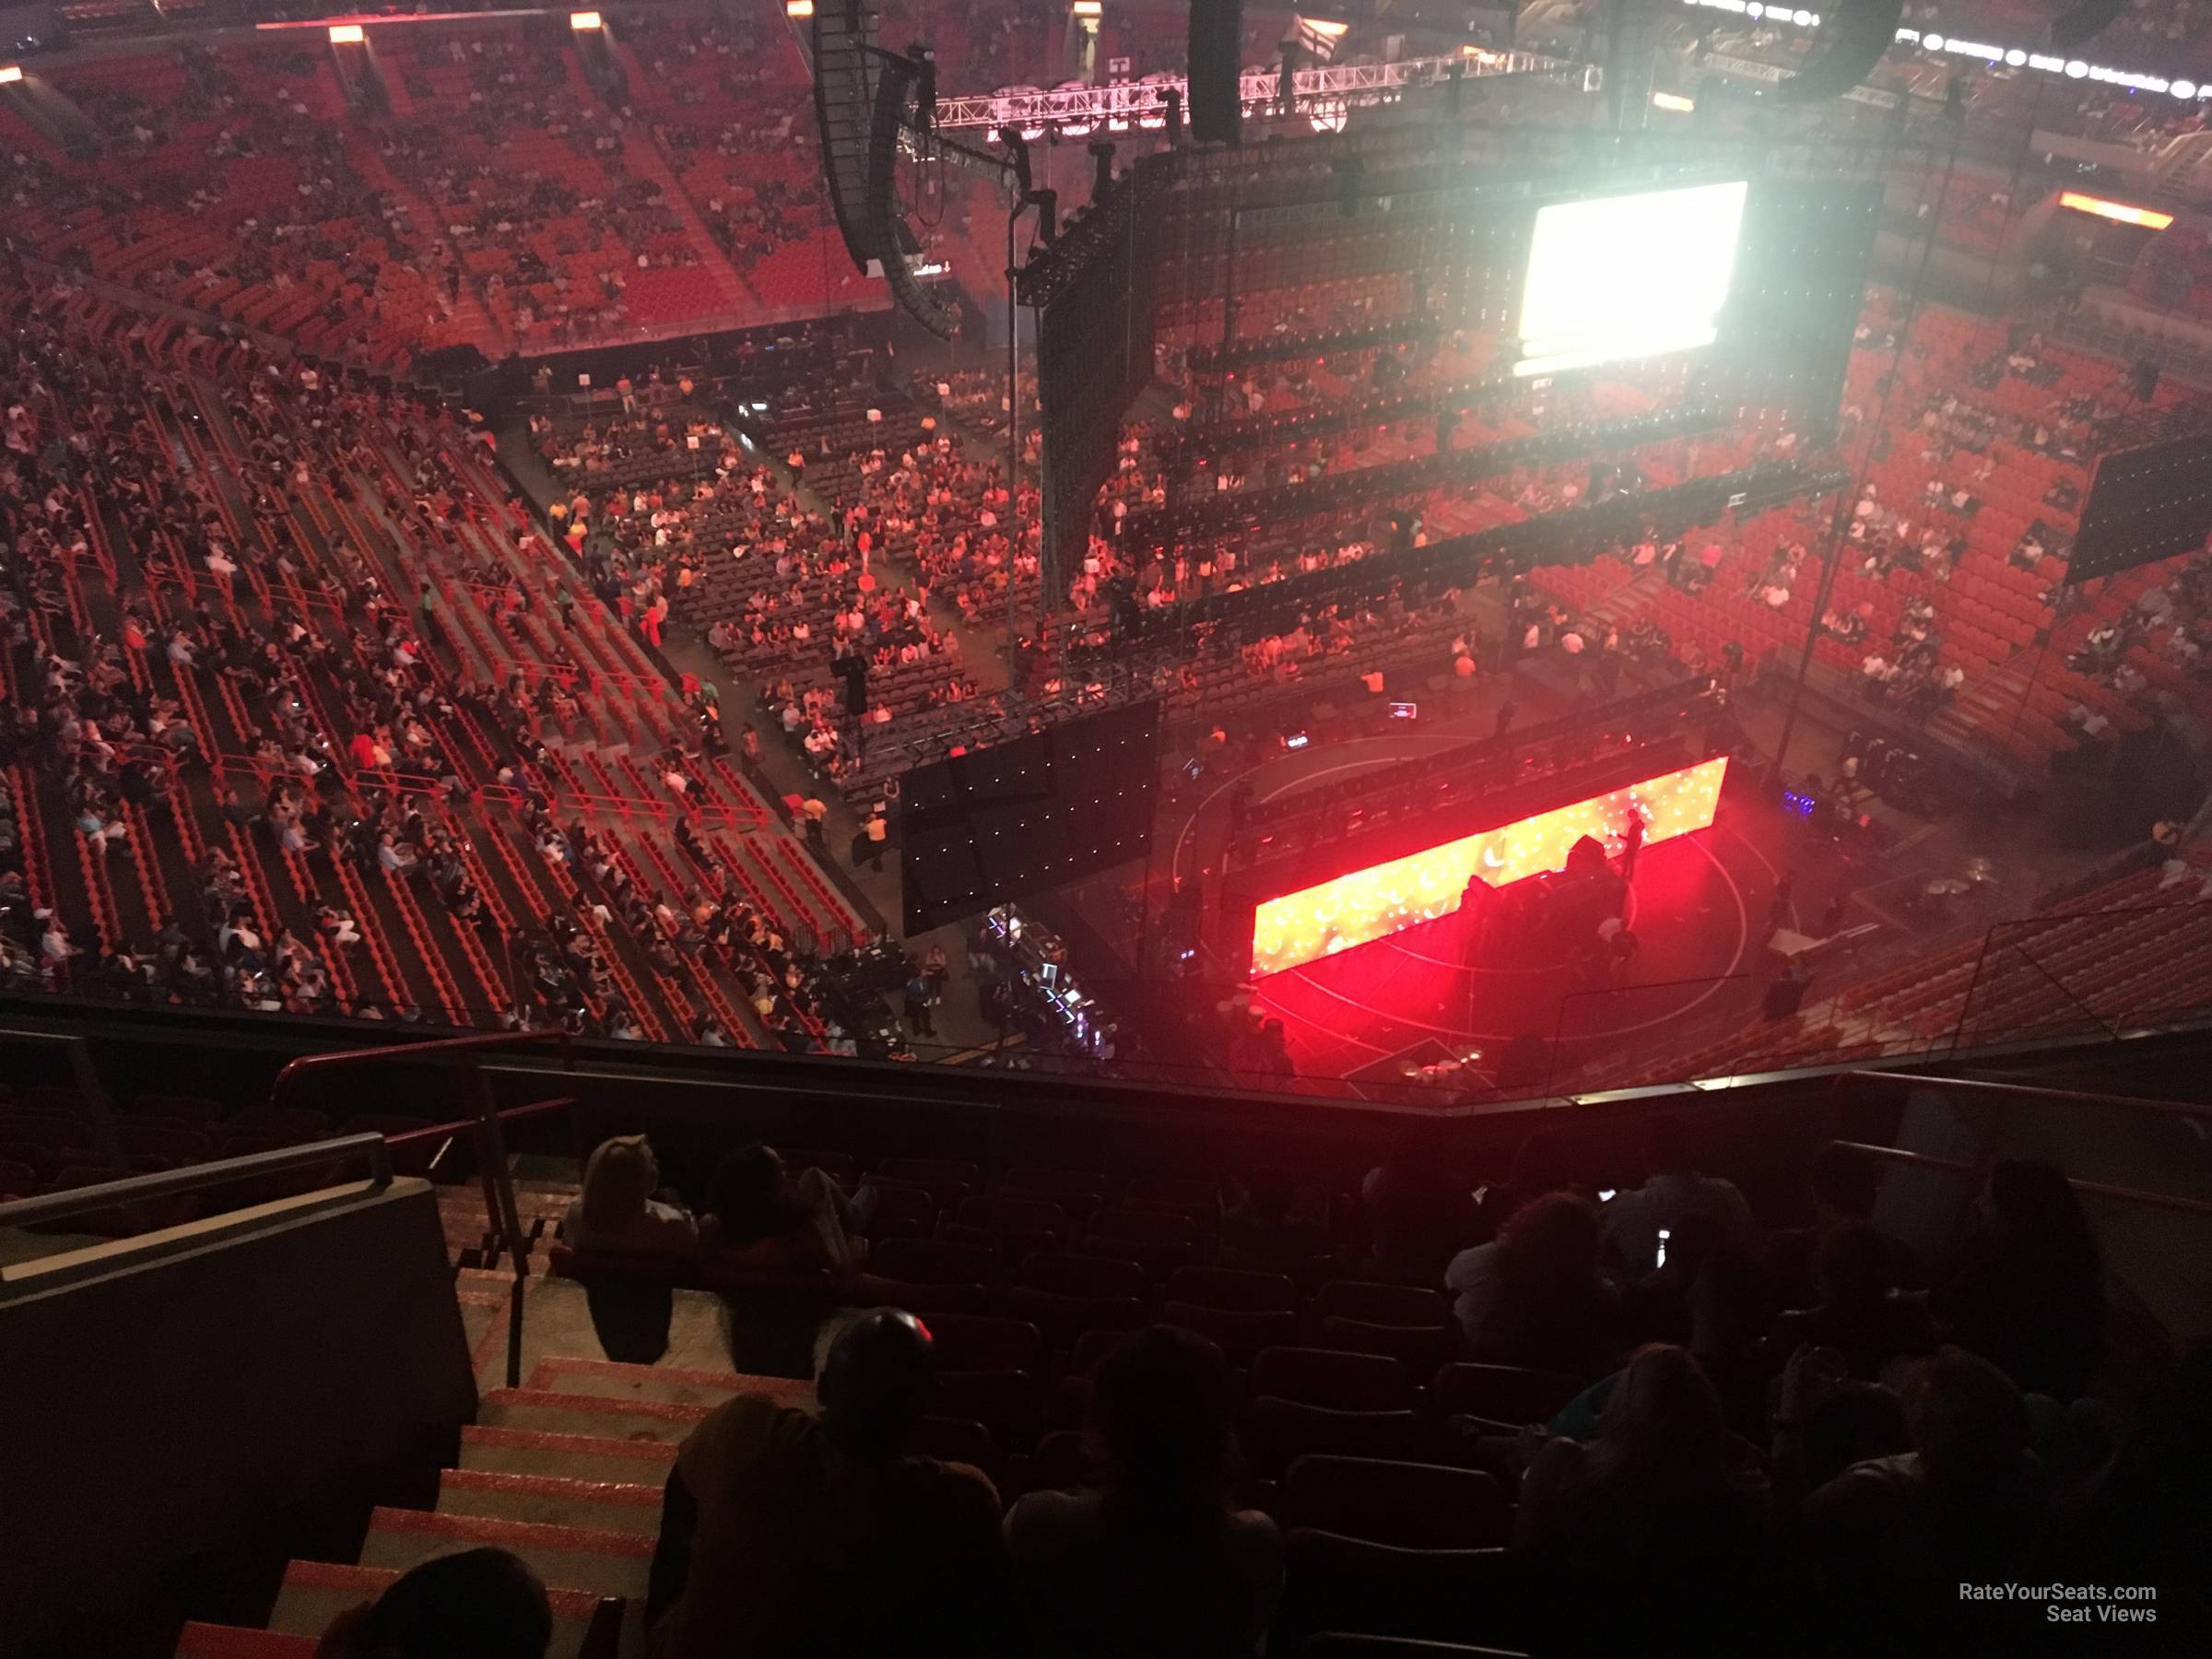 section 408, row 10 seat view  for concert - kaseya center